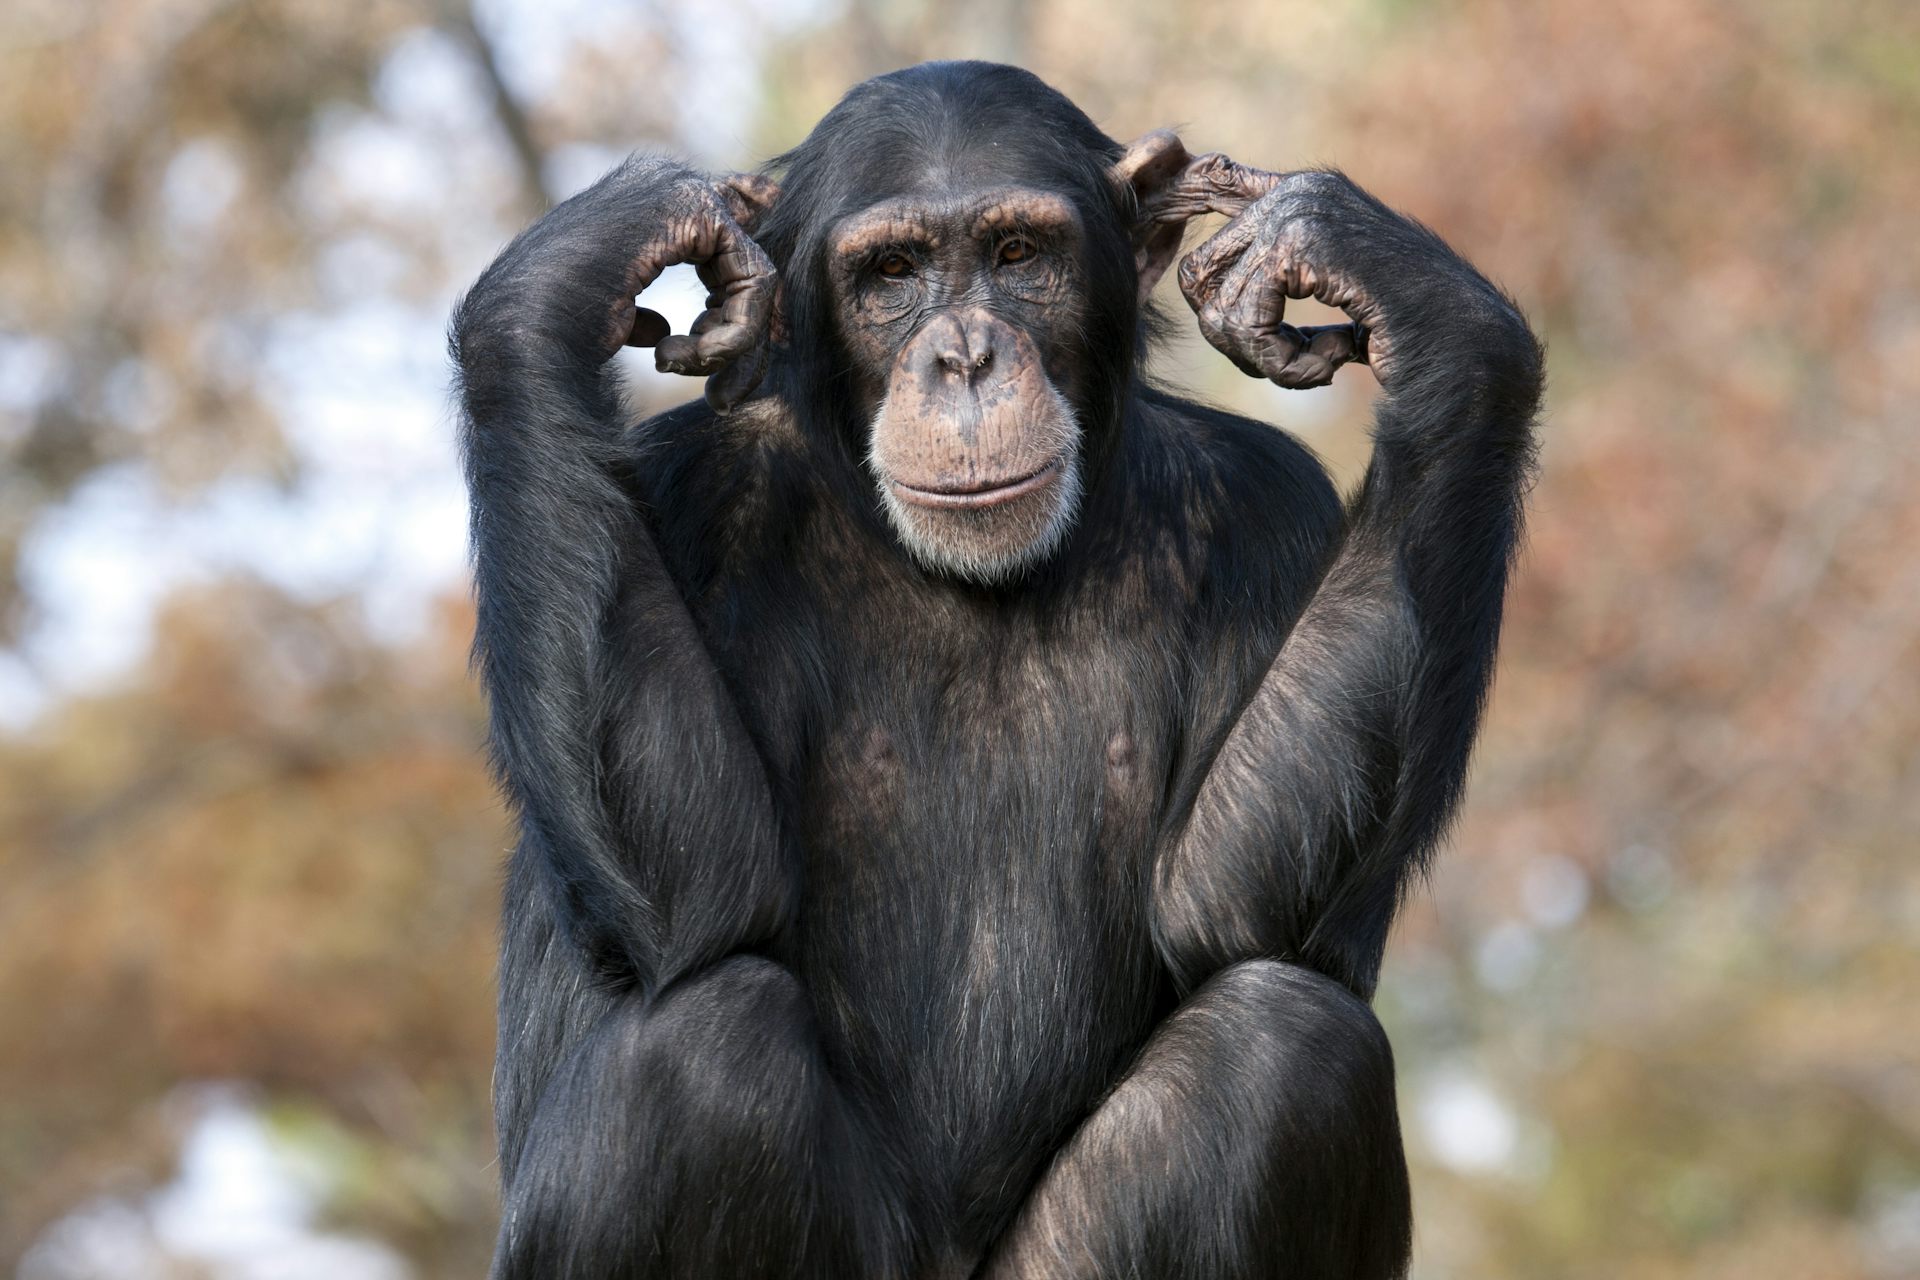 Image of a chimp holding its ears.